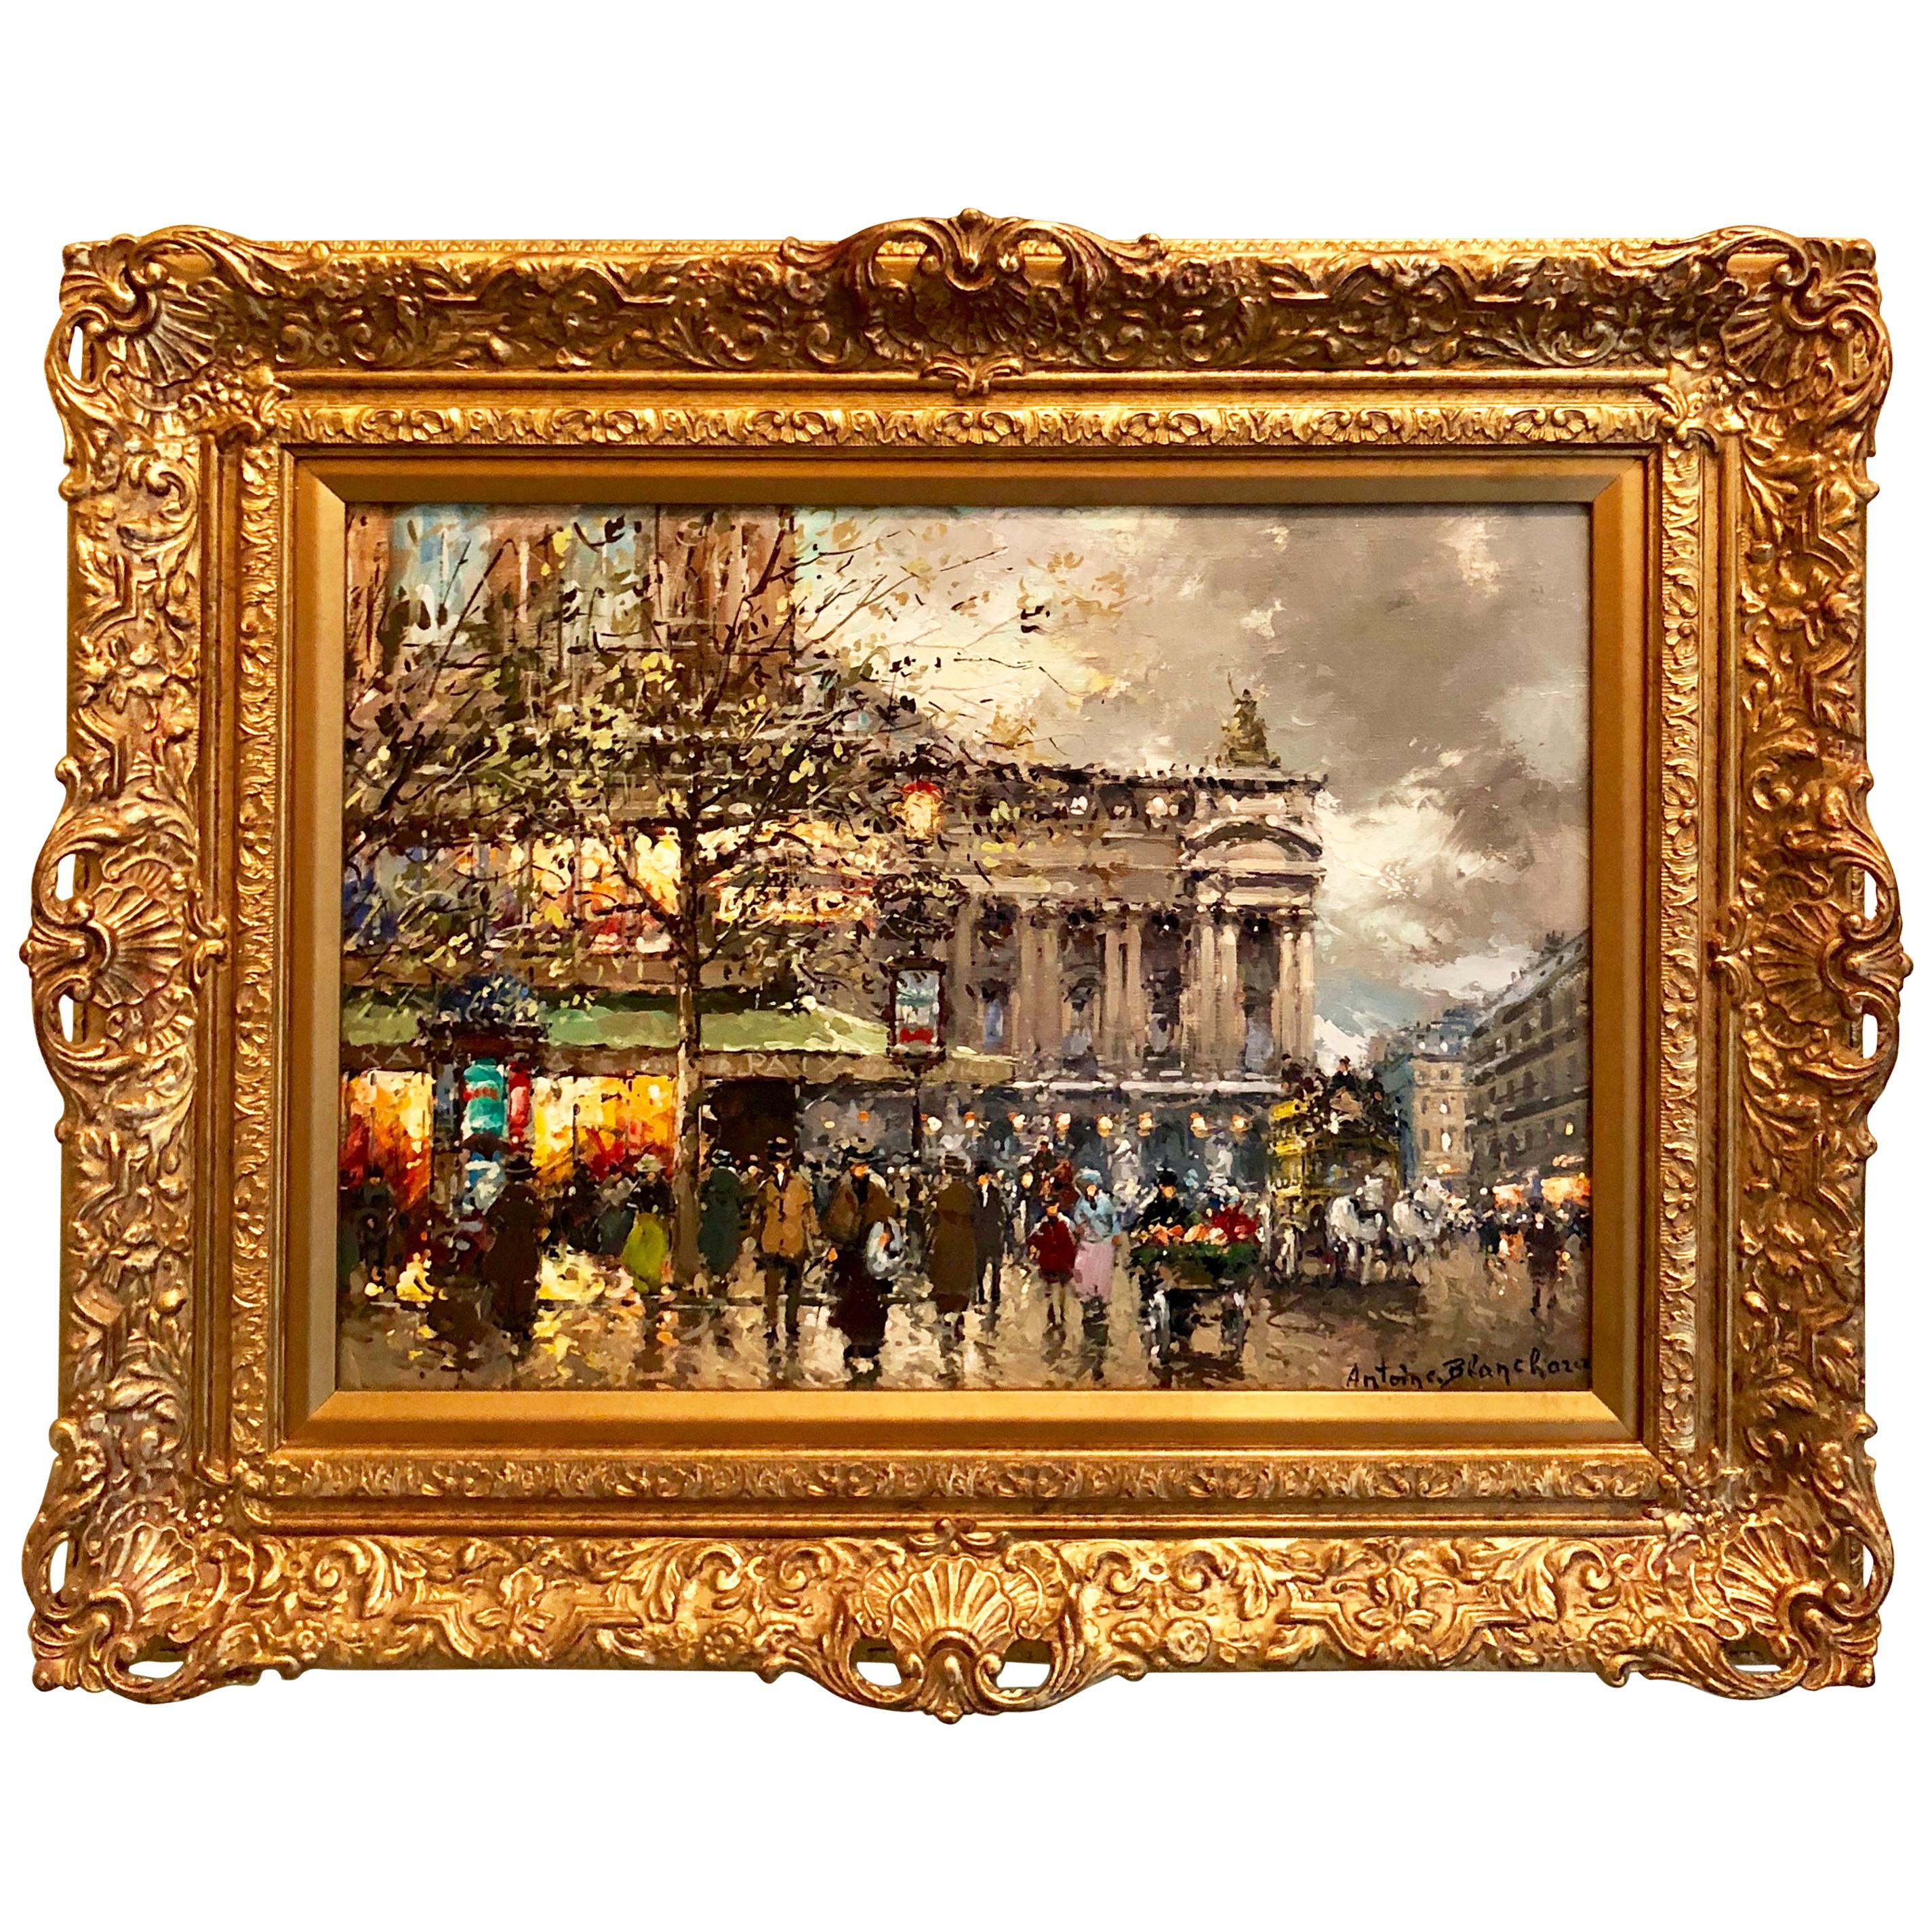 "A Busy Day in Paris" by Antoine Blanchard